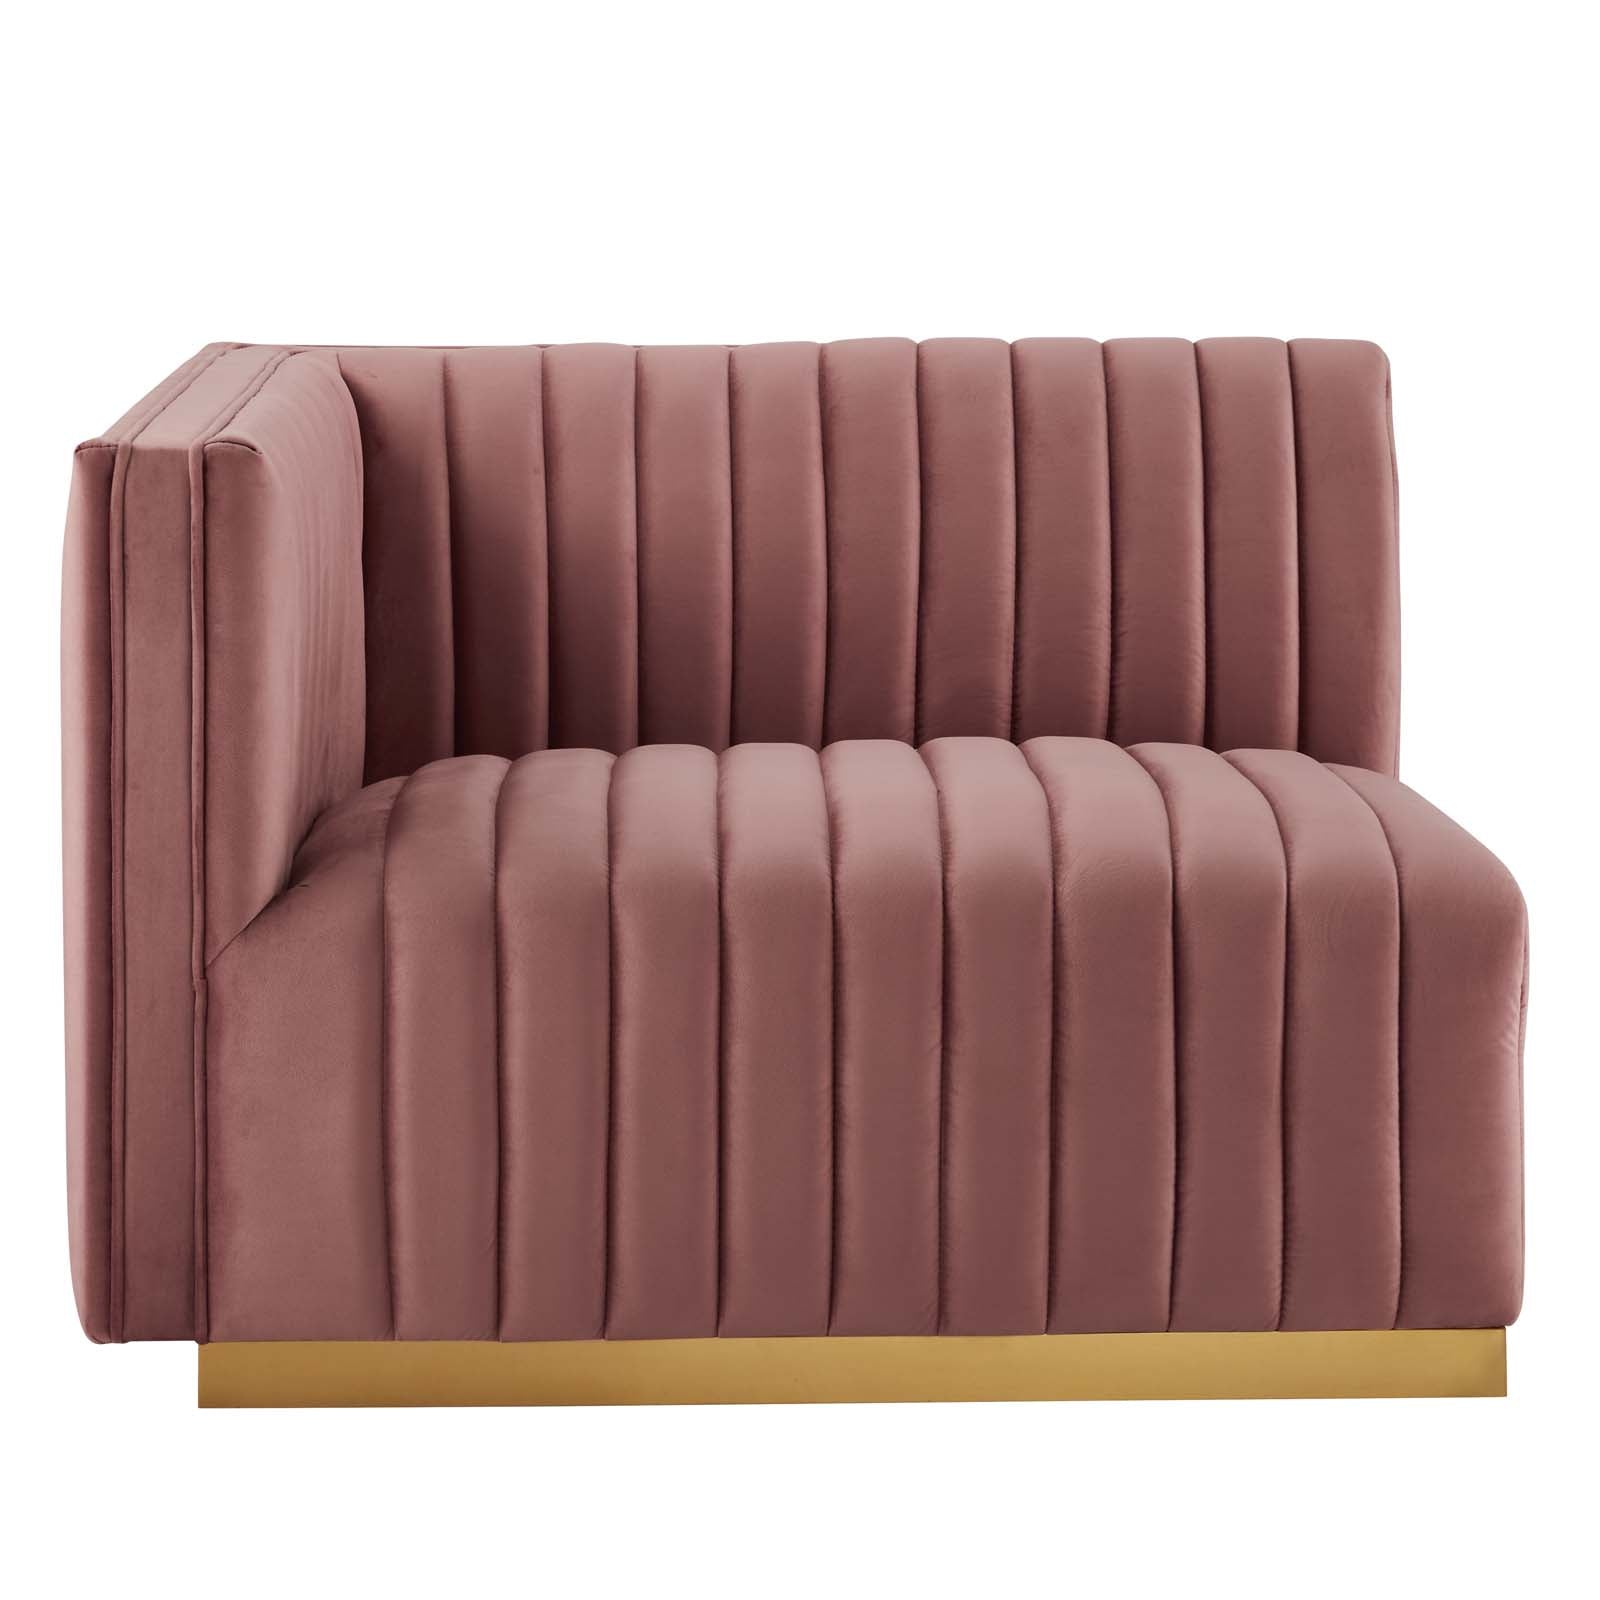 Modway Sectional Sofas - Conjure Channel Tufted Performance Velvet 6 Piece U-Shaped Sectional Gold | Dusty Rose